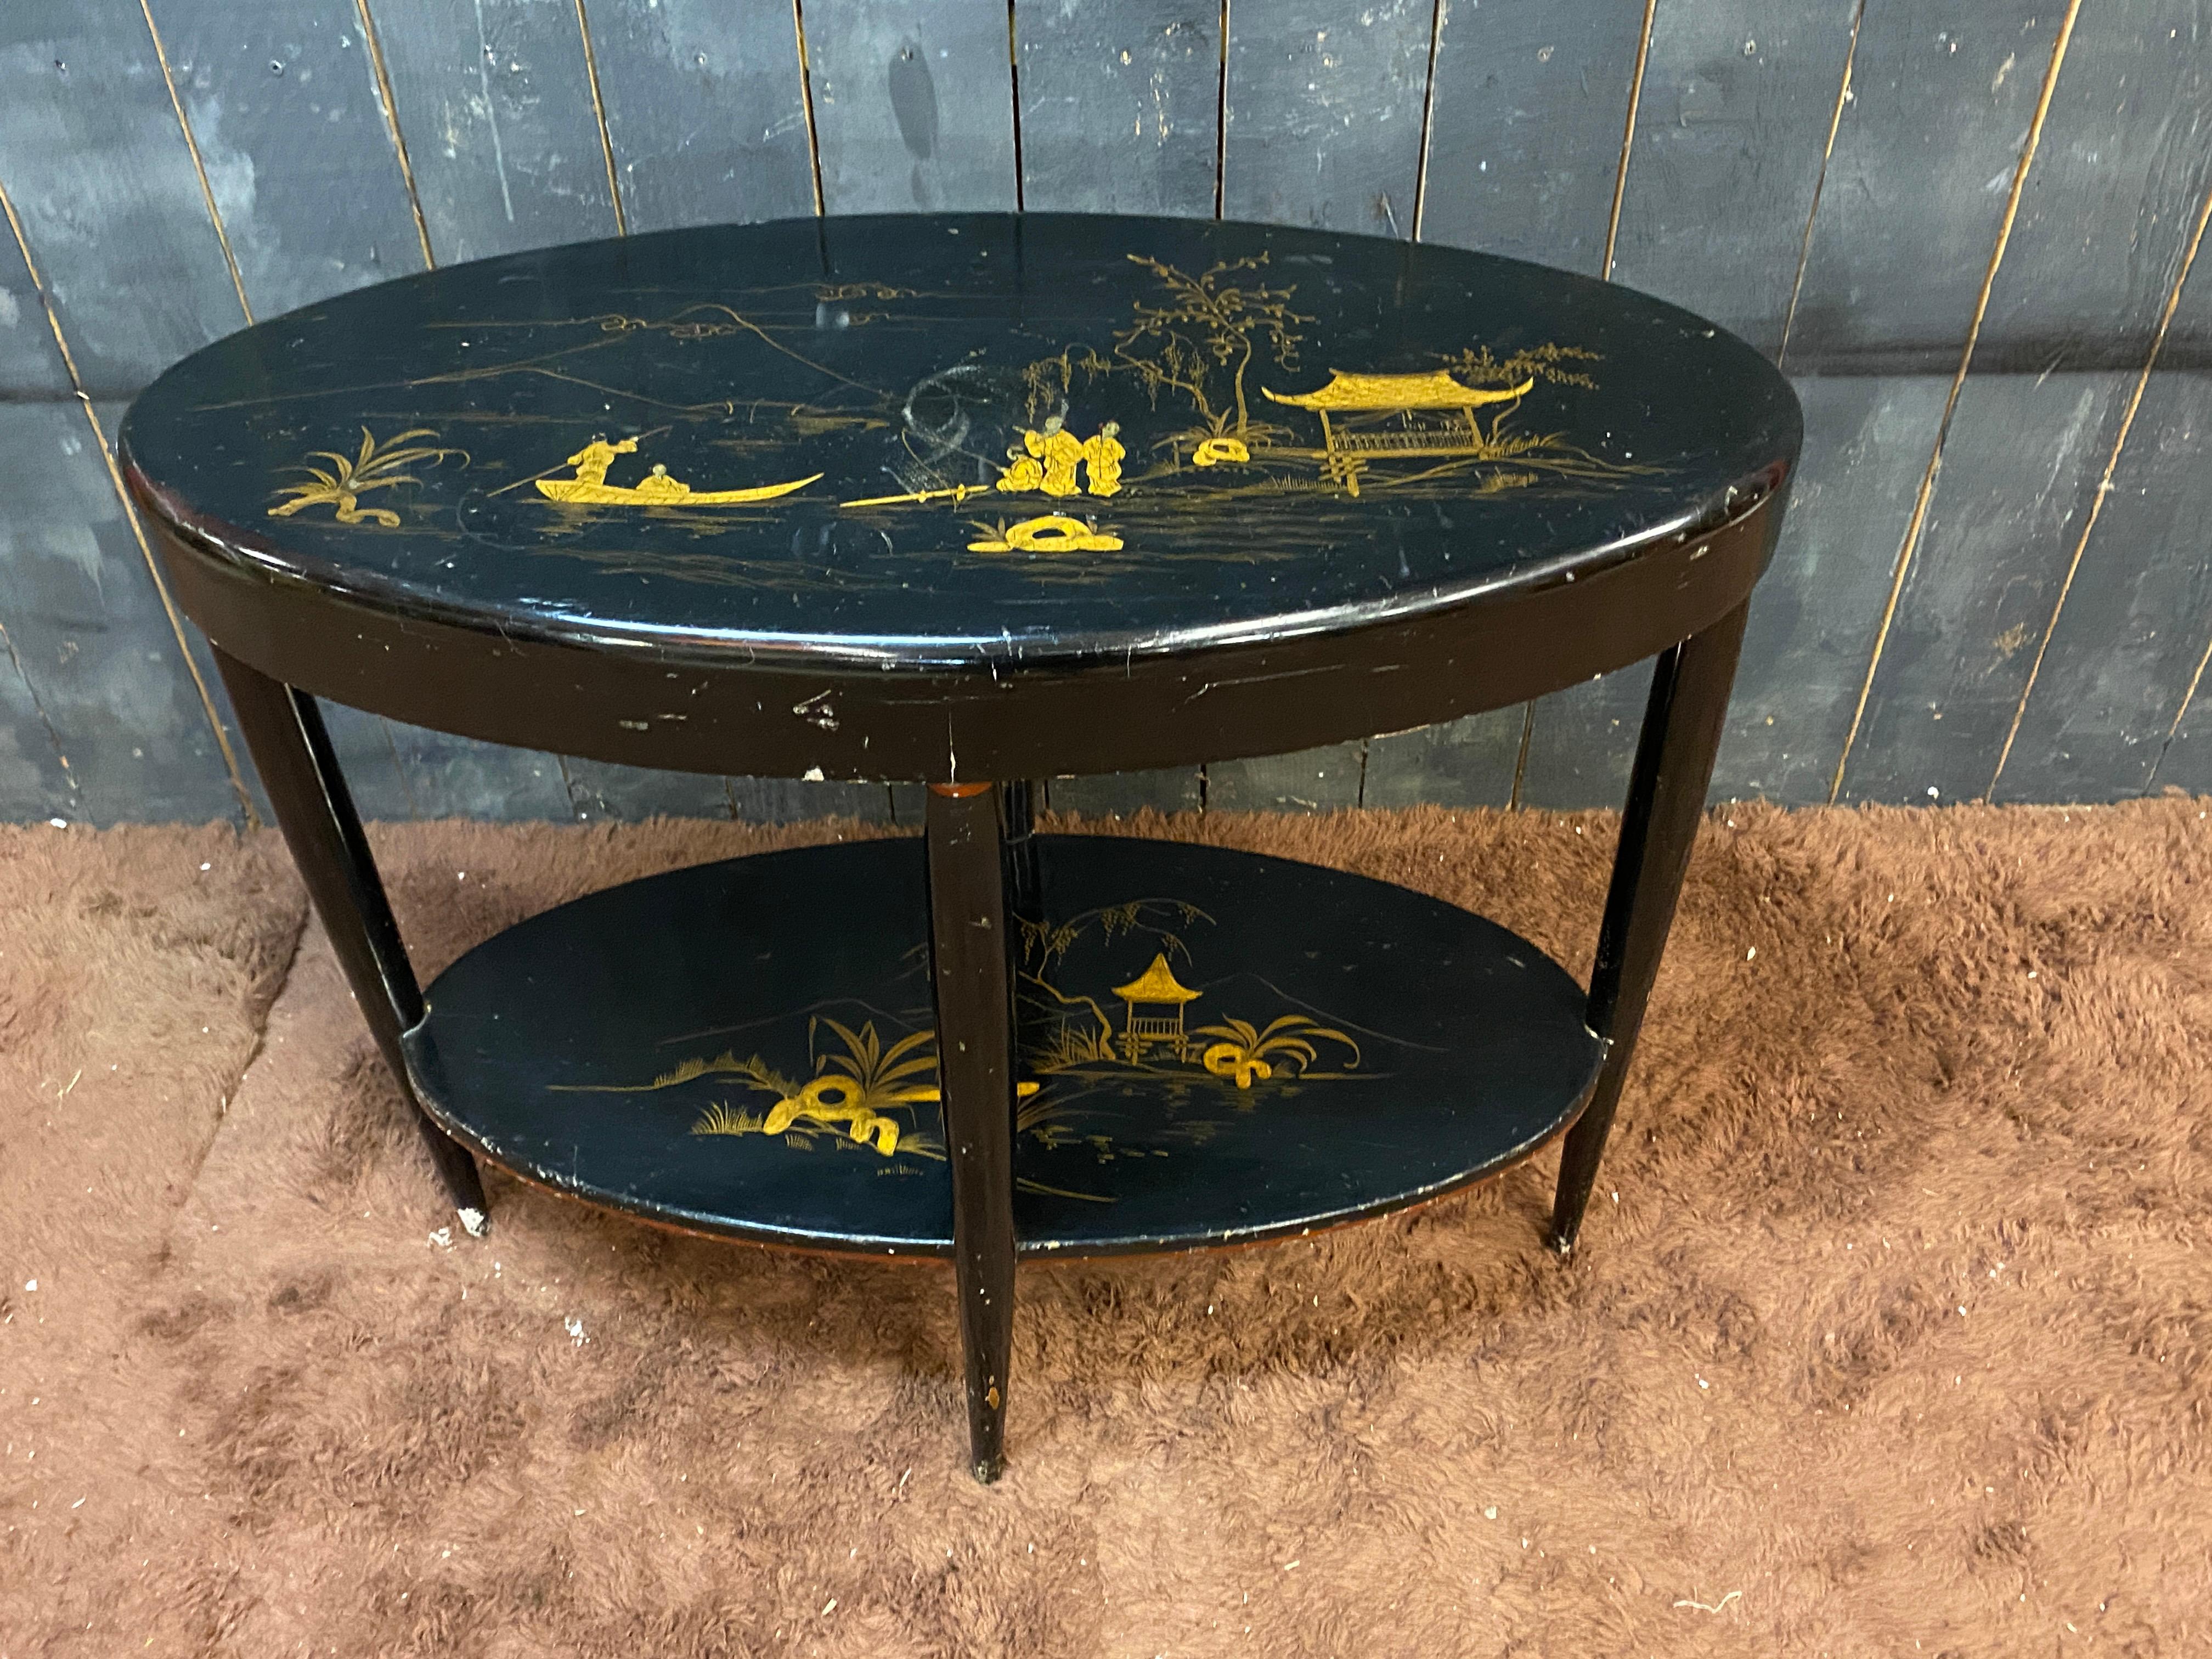 Console table or high pedestal table in black and gold lacquered wood, with Chinese decoration circa 1930
Lack of paint and marks on the top